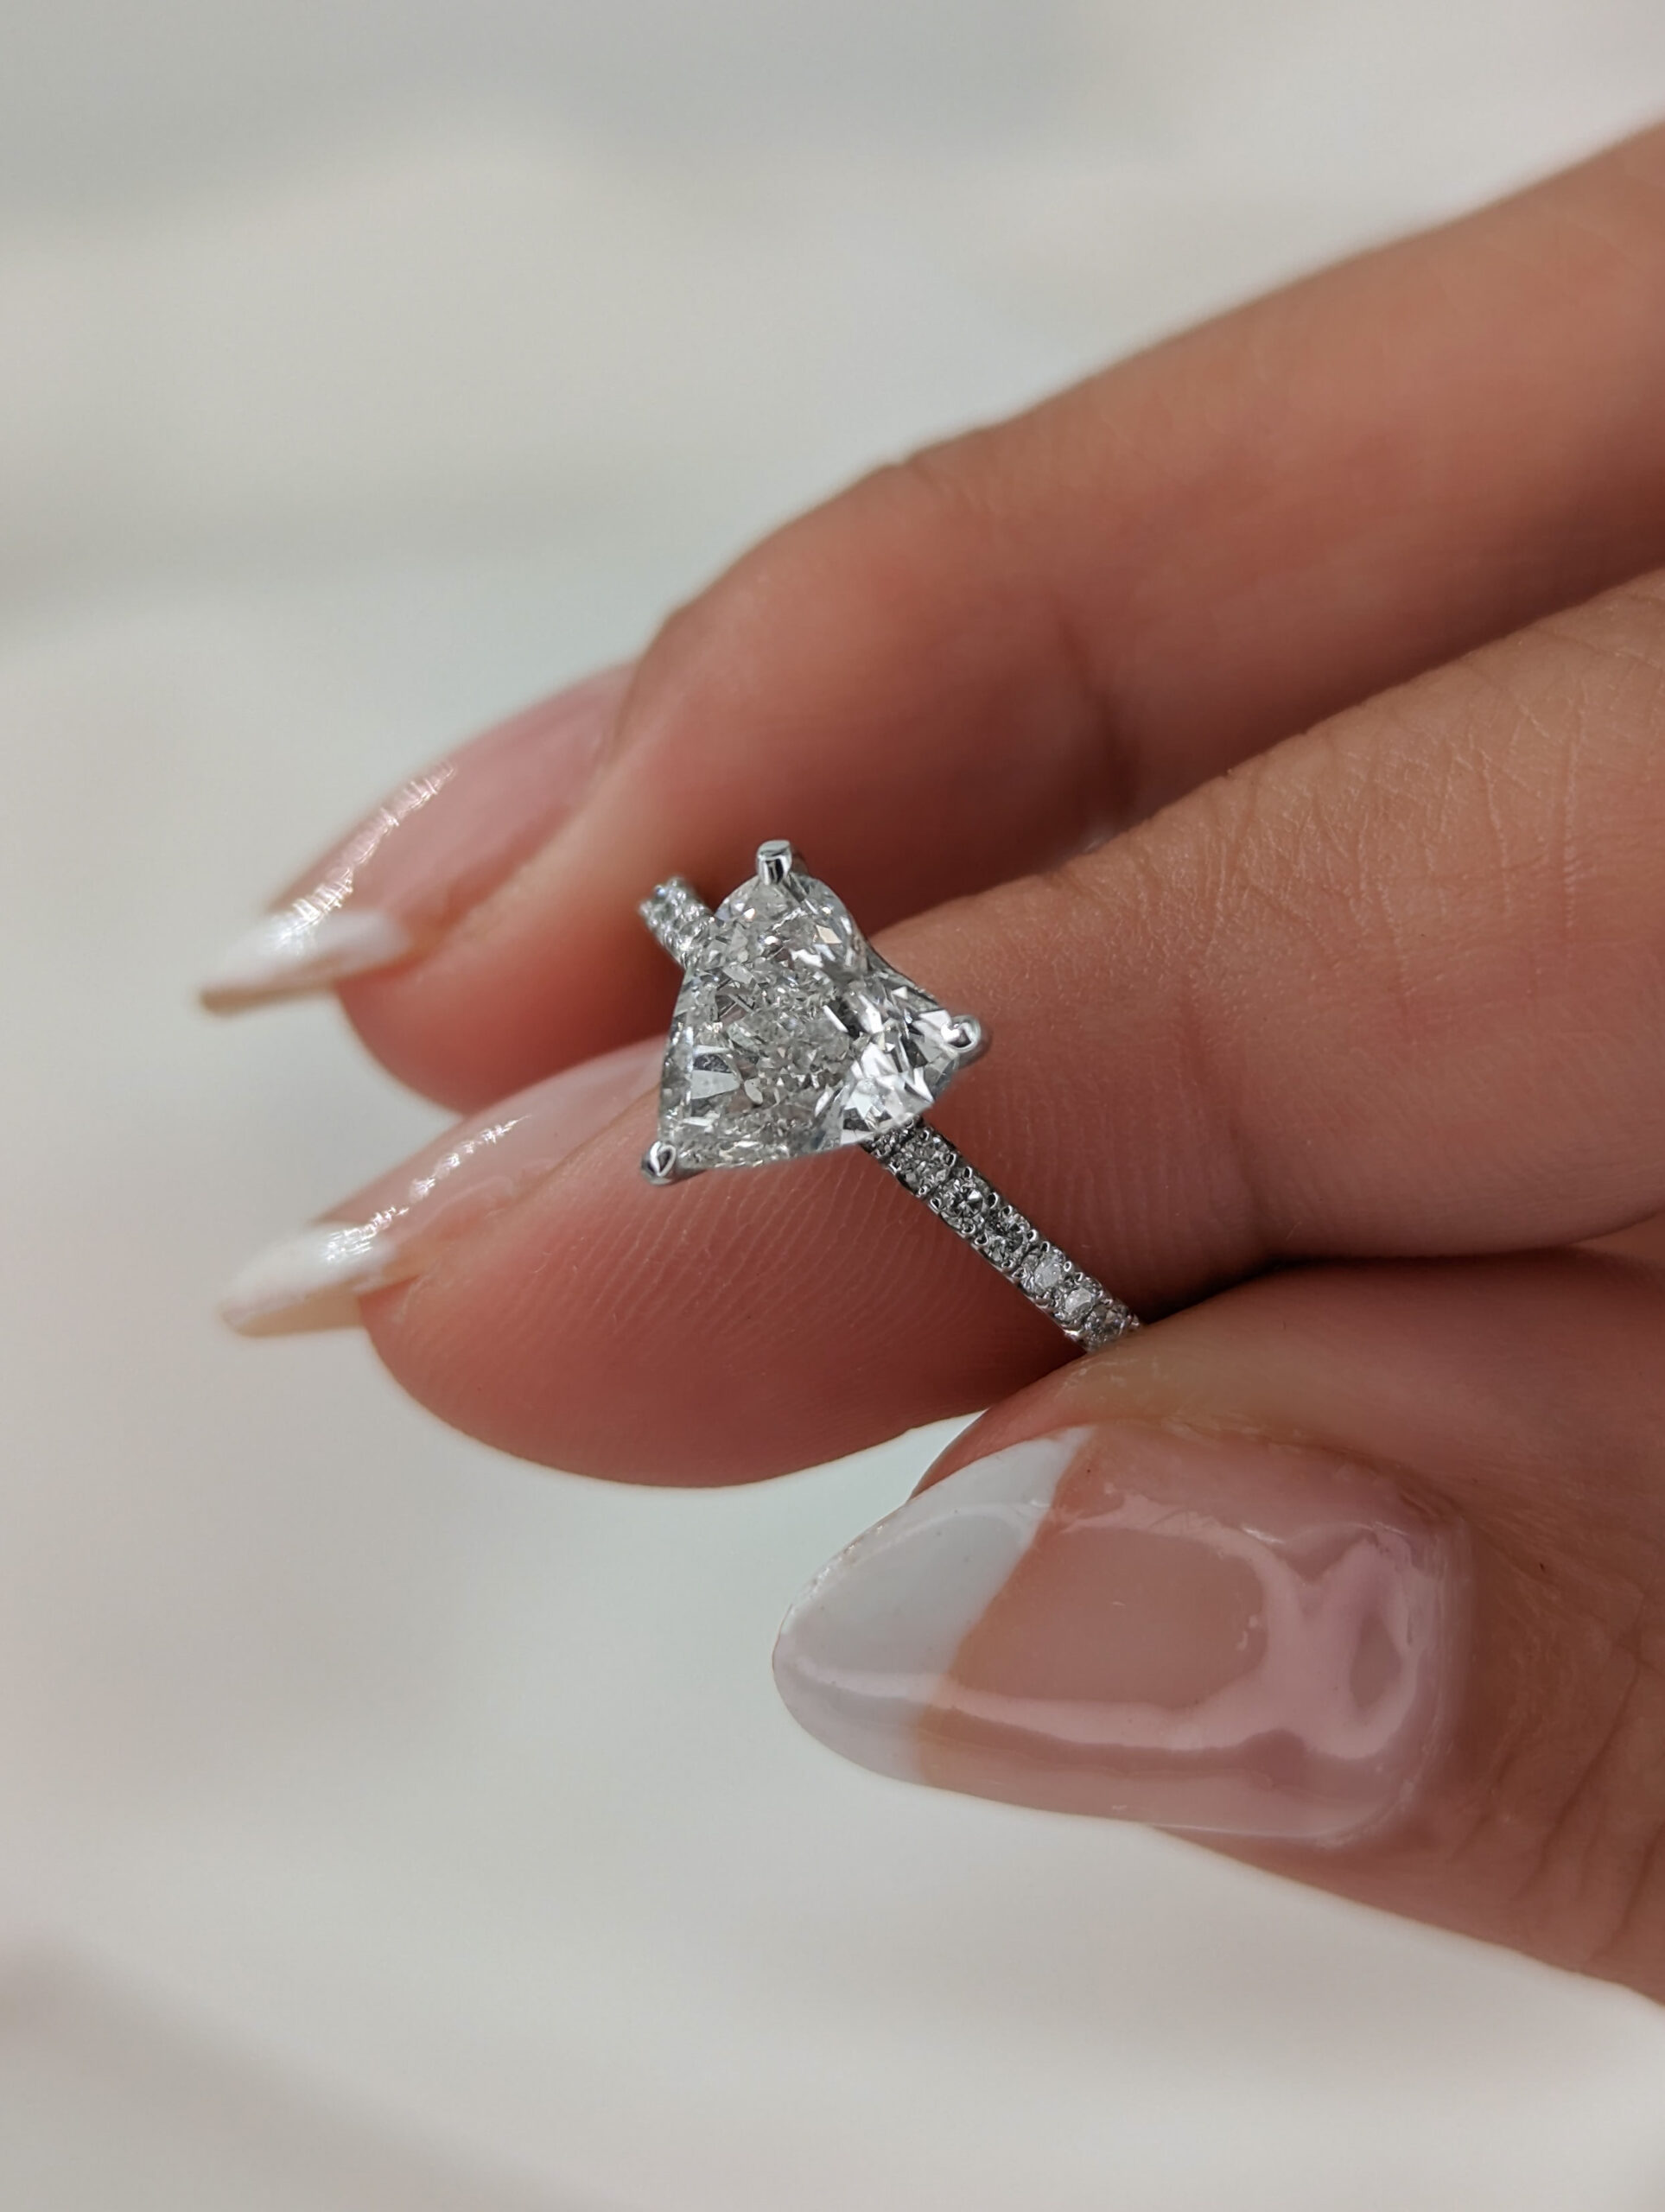 Capture Love with Heart-Shaped Engagement Rings - AC Silver